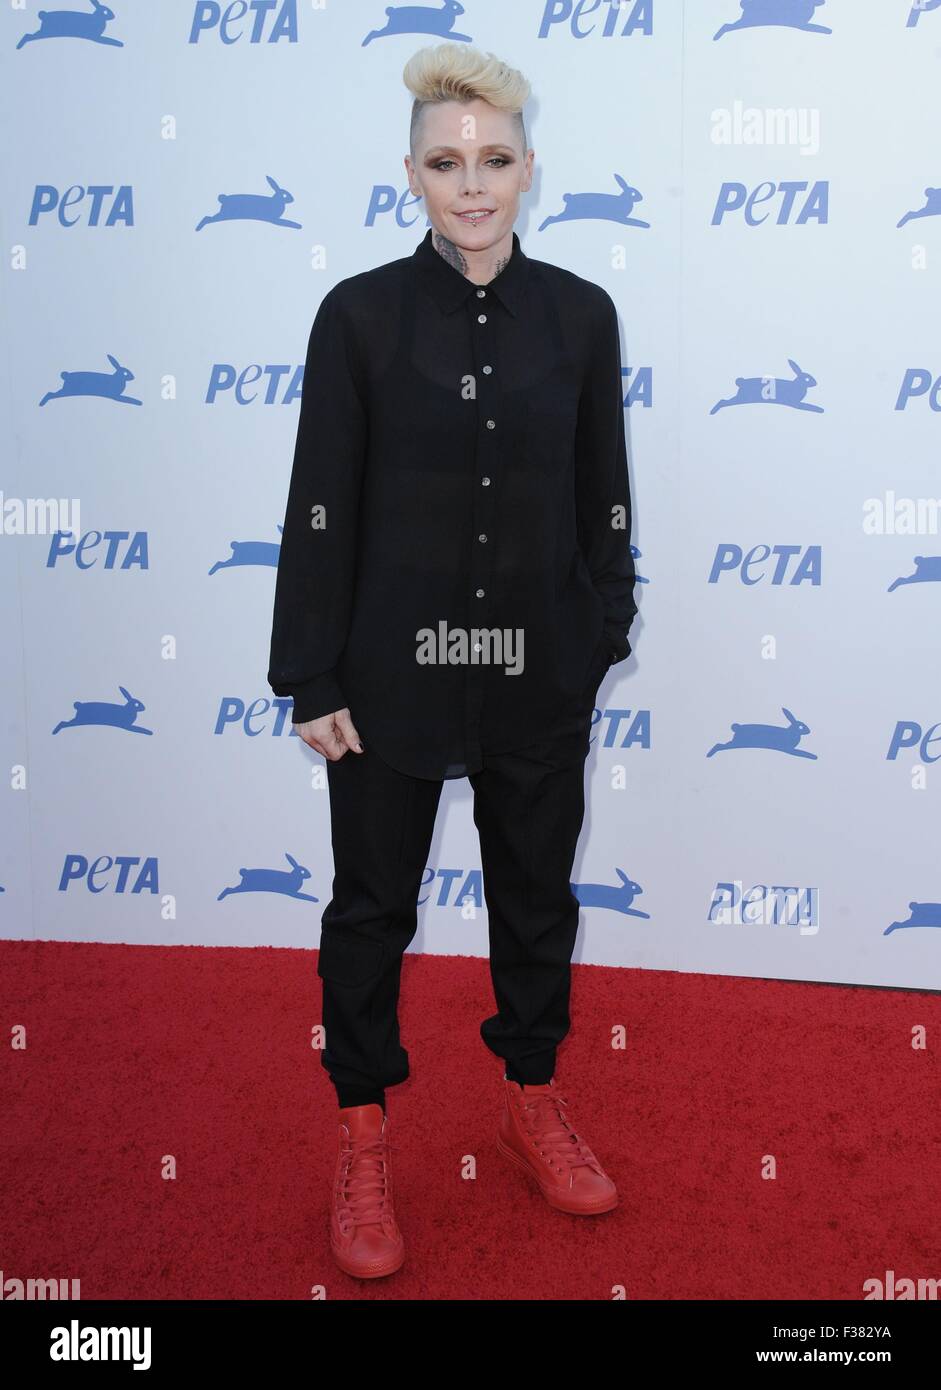 Los Angeles, CA, USA. 30th Sep, 2015. Otep Shamaya at arrivals for PETA's 35th Anniversary Gala, The Hollywood Palladium, Los Angeles, CA September 30, 2015. Credit:  Dee Cercone/Everett Collection/Alamy Live News Stock Photo